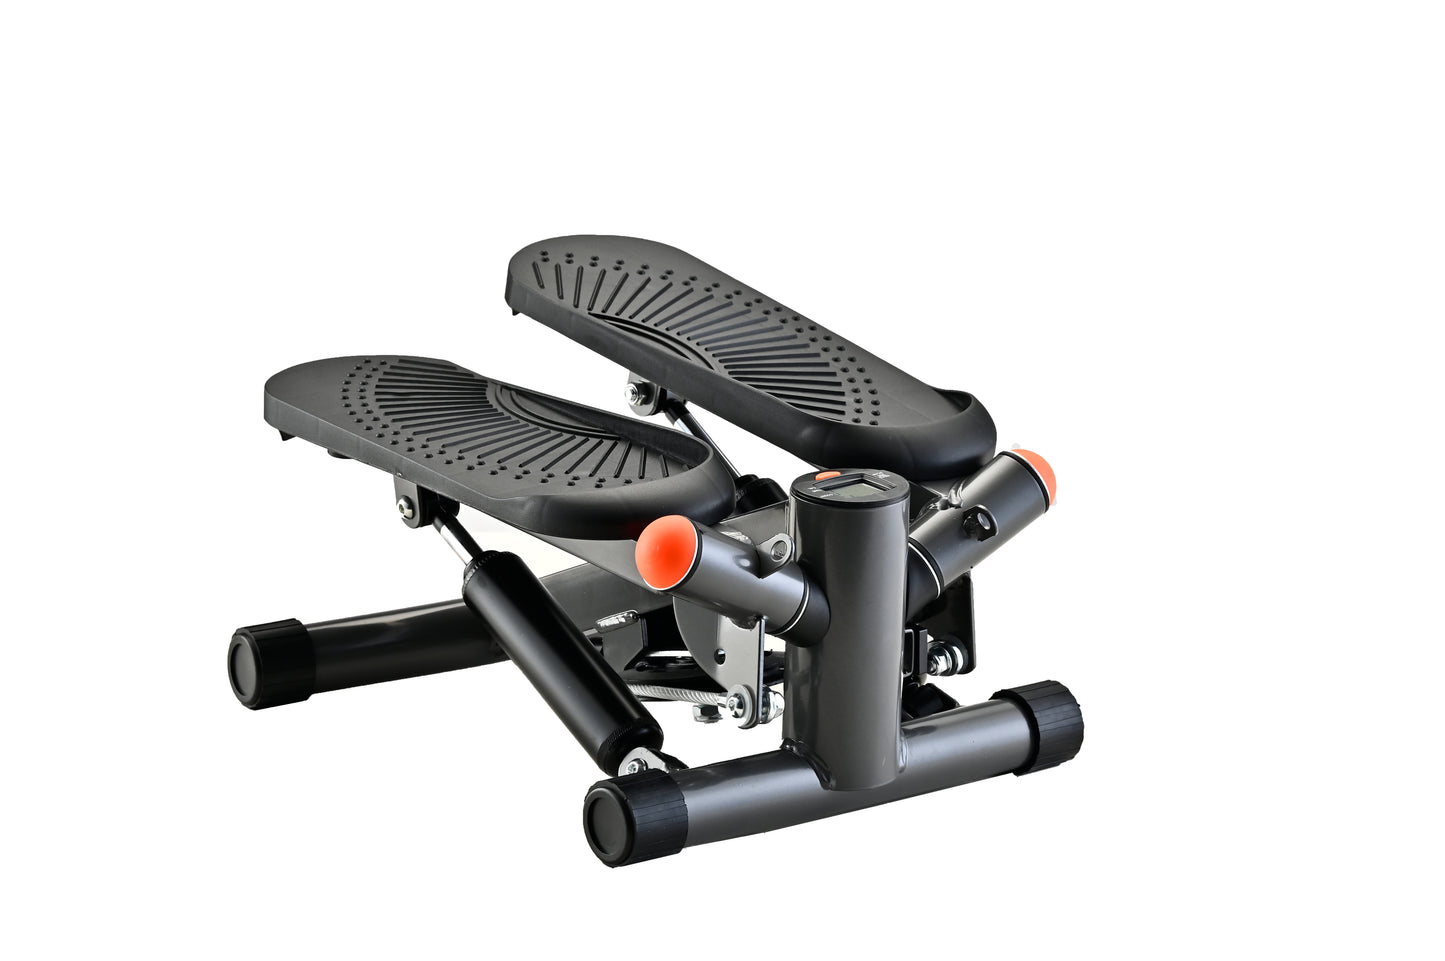 8708S adjustable stair stepper for homeuse with LED monitor